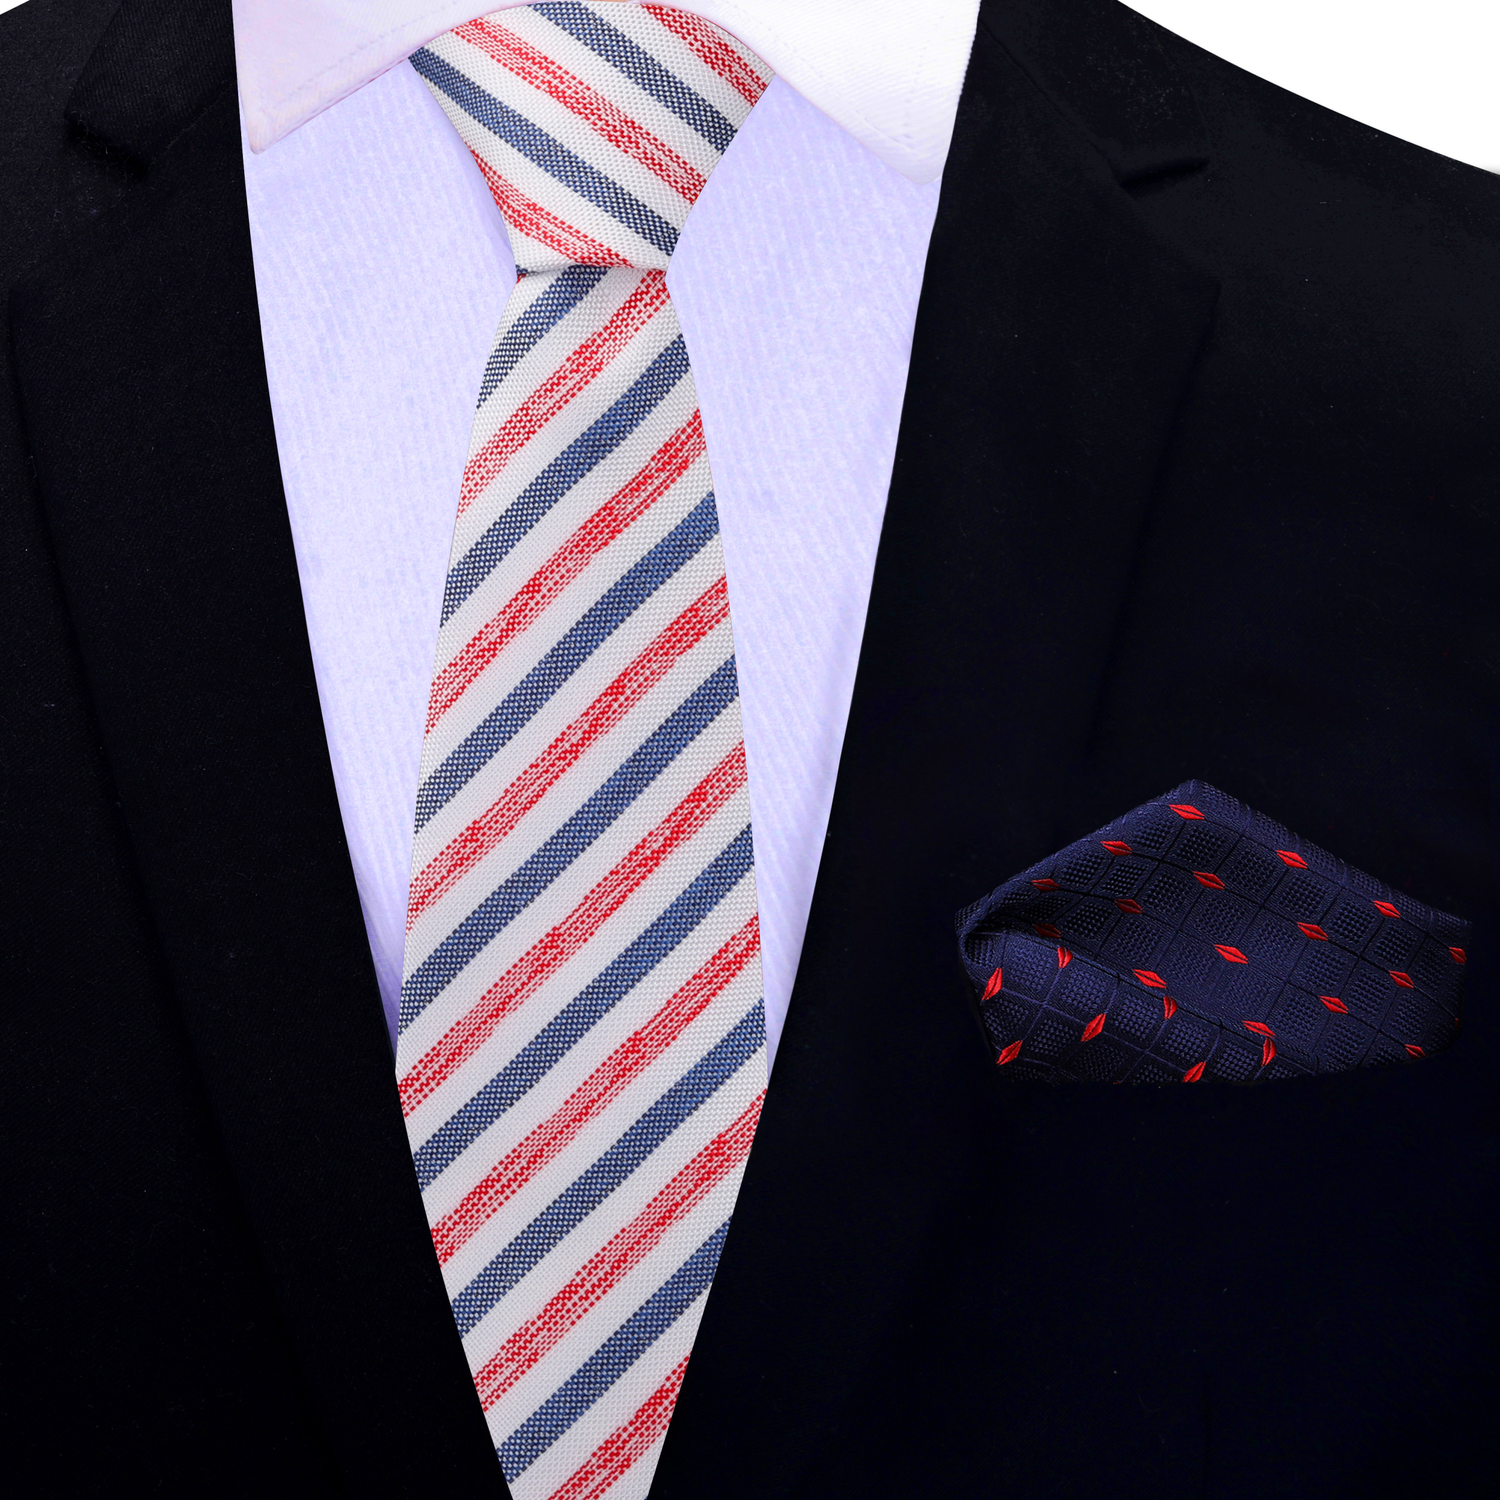 Thin Tie: White with Blue and Red Stripes Necktie with Blue Red Diamonds Square